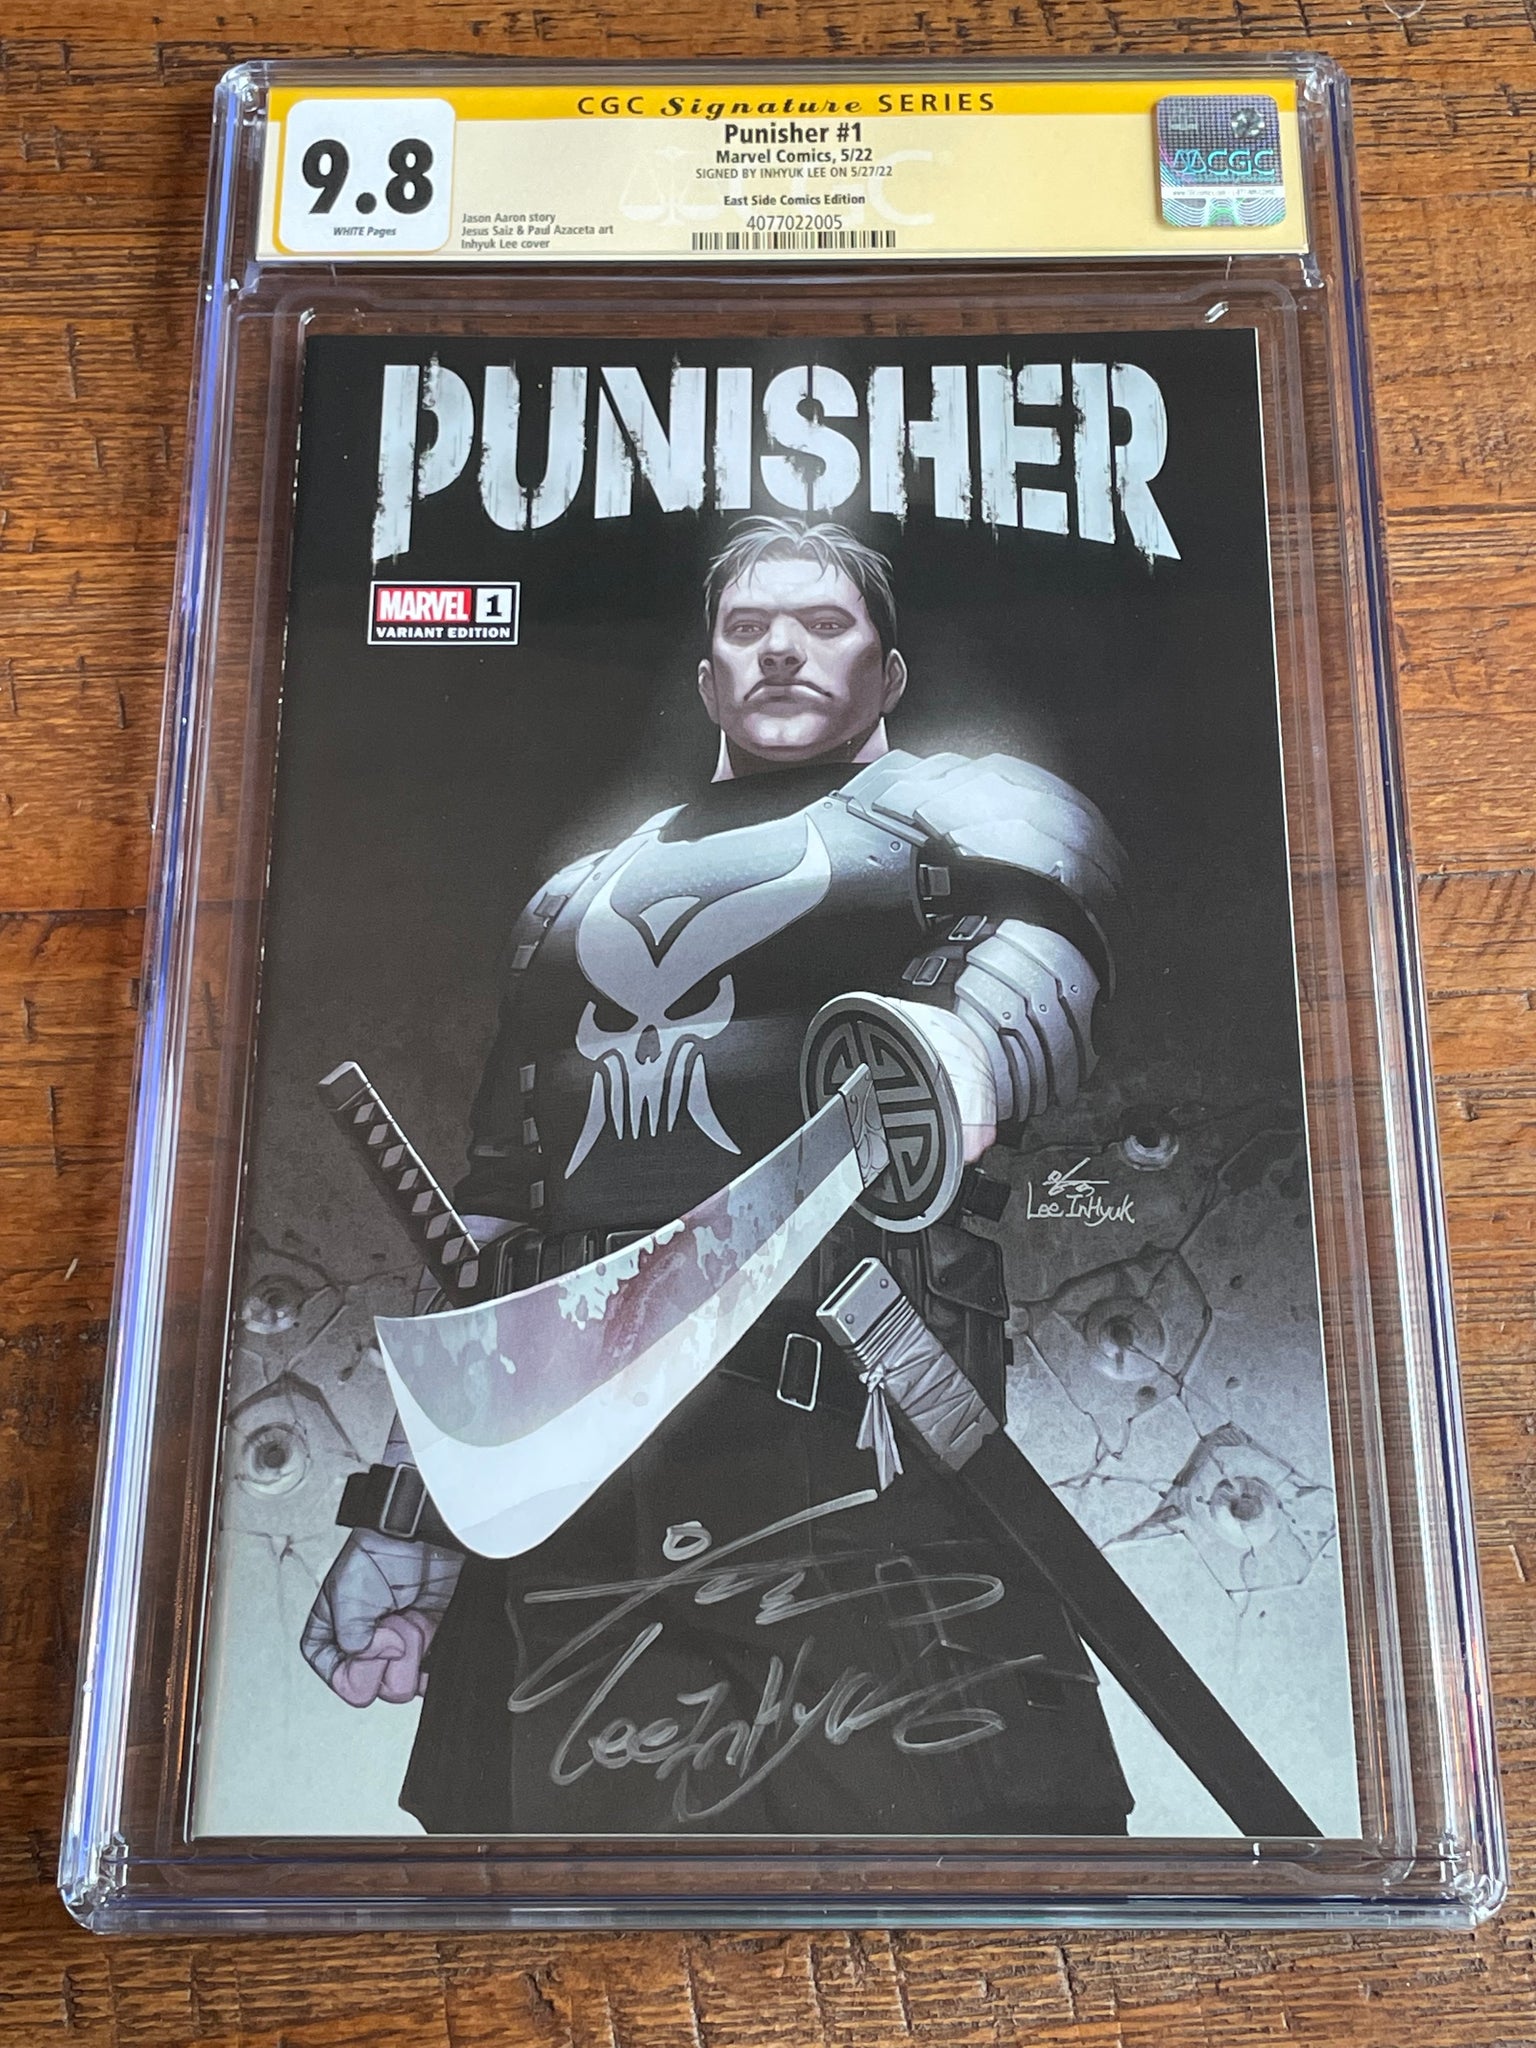 PUNISHER #1 CGC SS 9.8 INHYUK LEE SIGNED TRADE DRESS VARIANT-A 2022